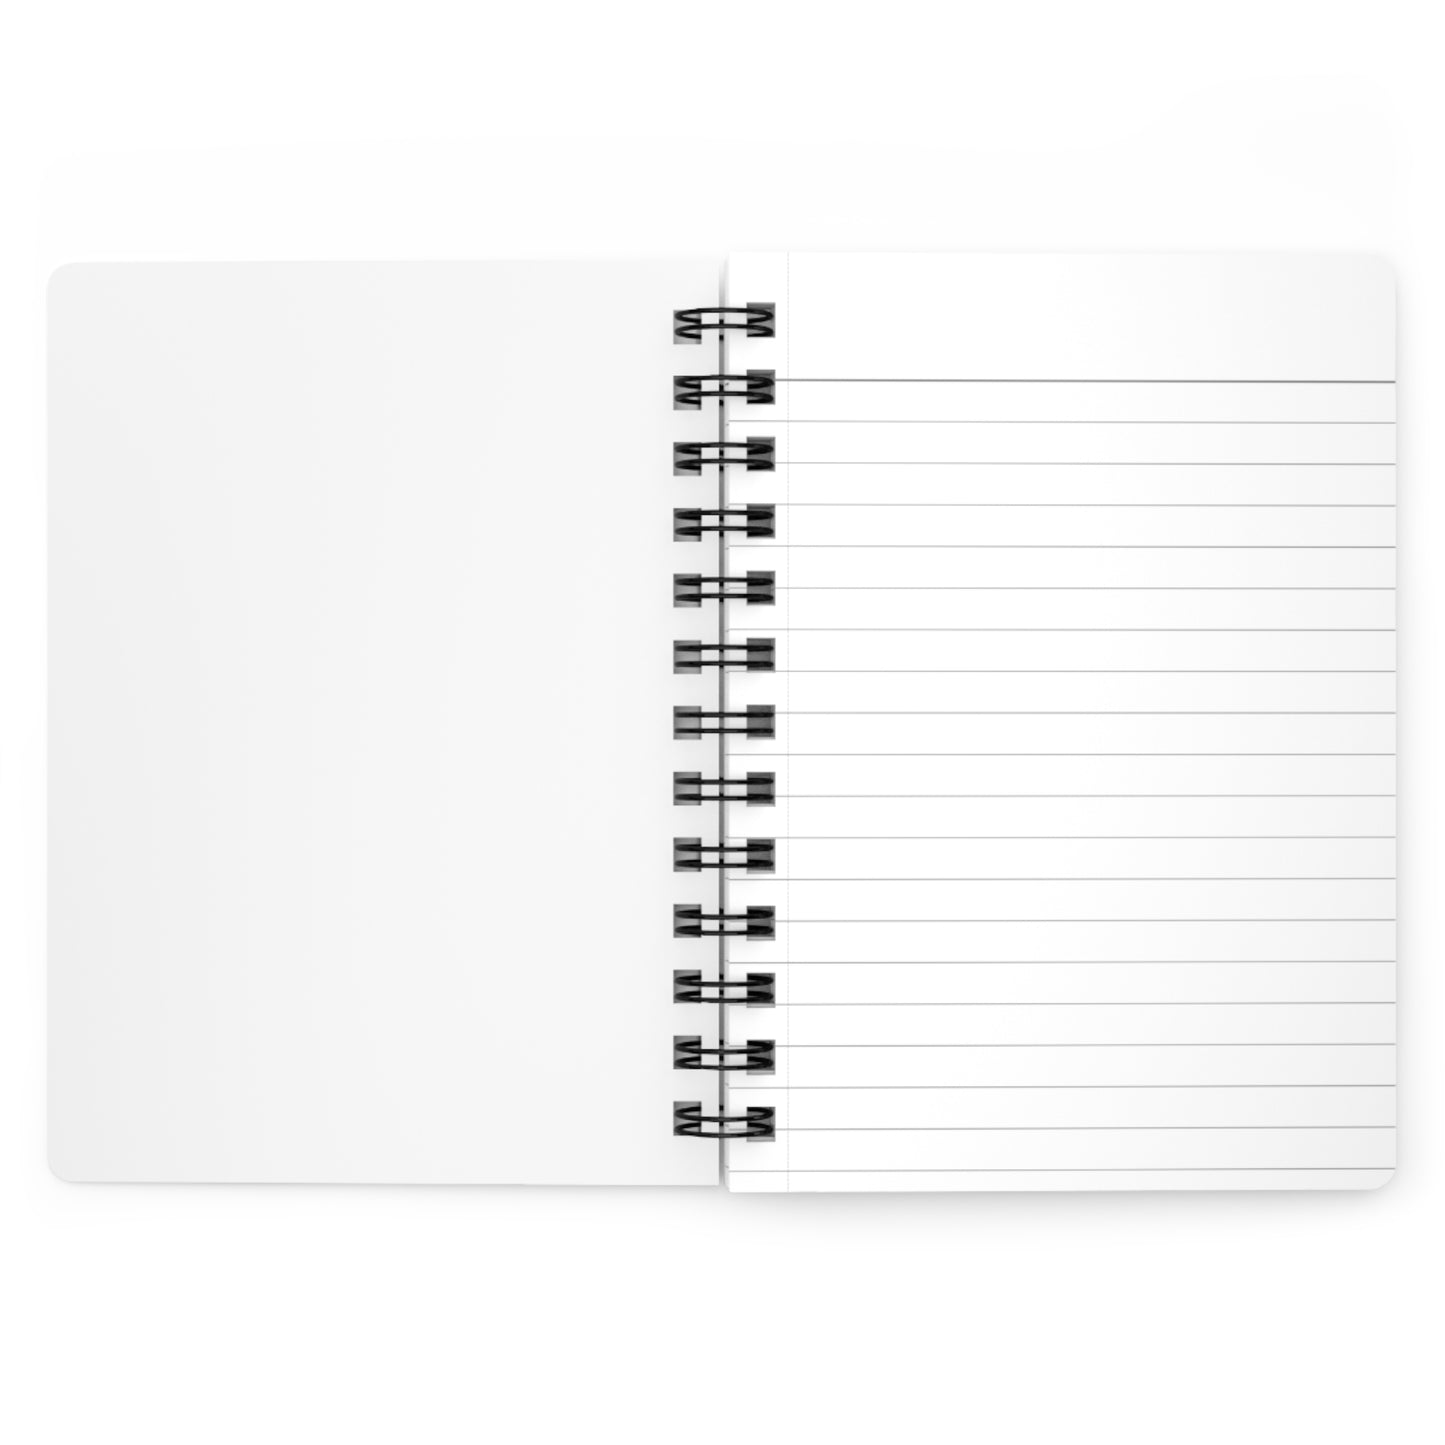 Boats 01 - Spiral Bound Journal One Size